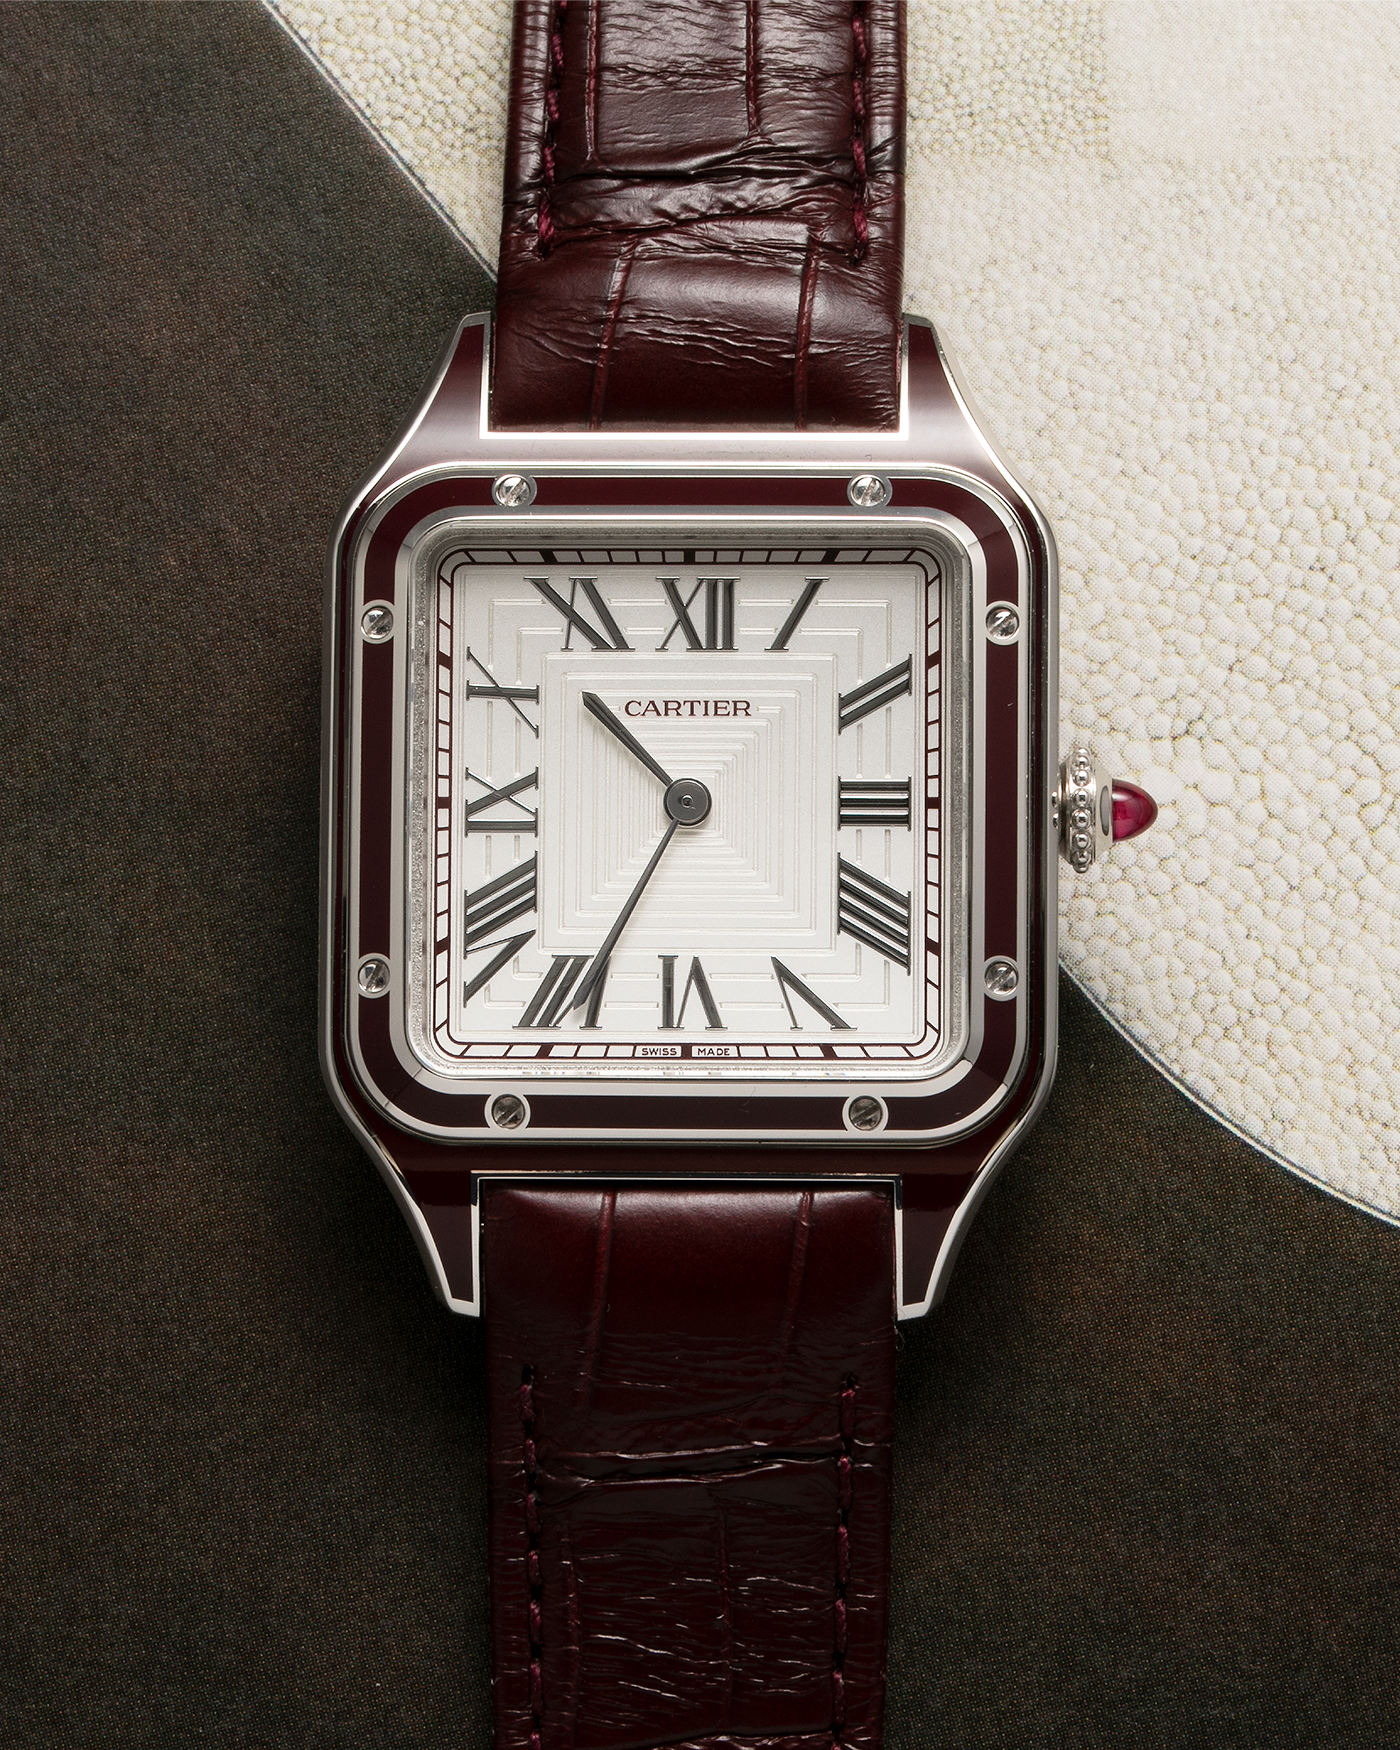 Brand: Cartier Year: 2022 Model: Santos-Dumont Large Limited Edition of 150 pieces Material: Platinum, Burgundy Lacquer Movement: Cartier Cal. 430 MC, Manual-Winding Case Diameter: 43.5mm x 31.4mm Bracelet / Strap: Cartier Burgundy Alligator Leather Strap with Signed Platinum Tang Buckle